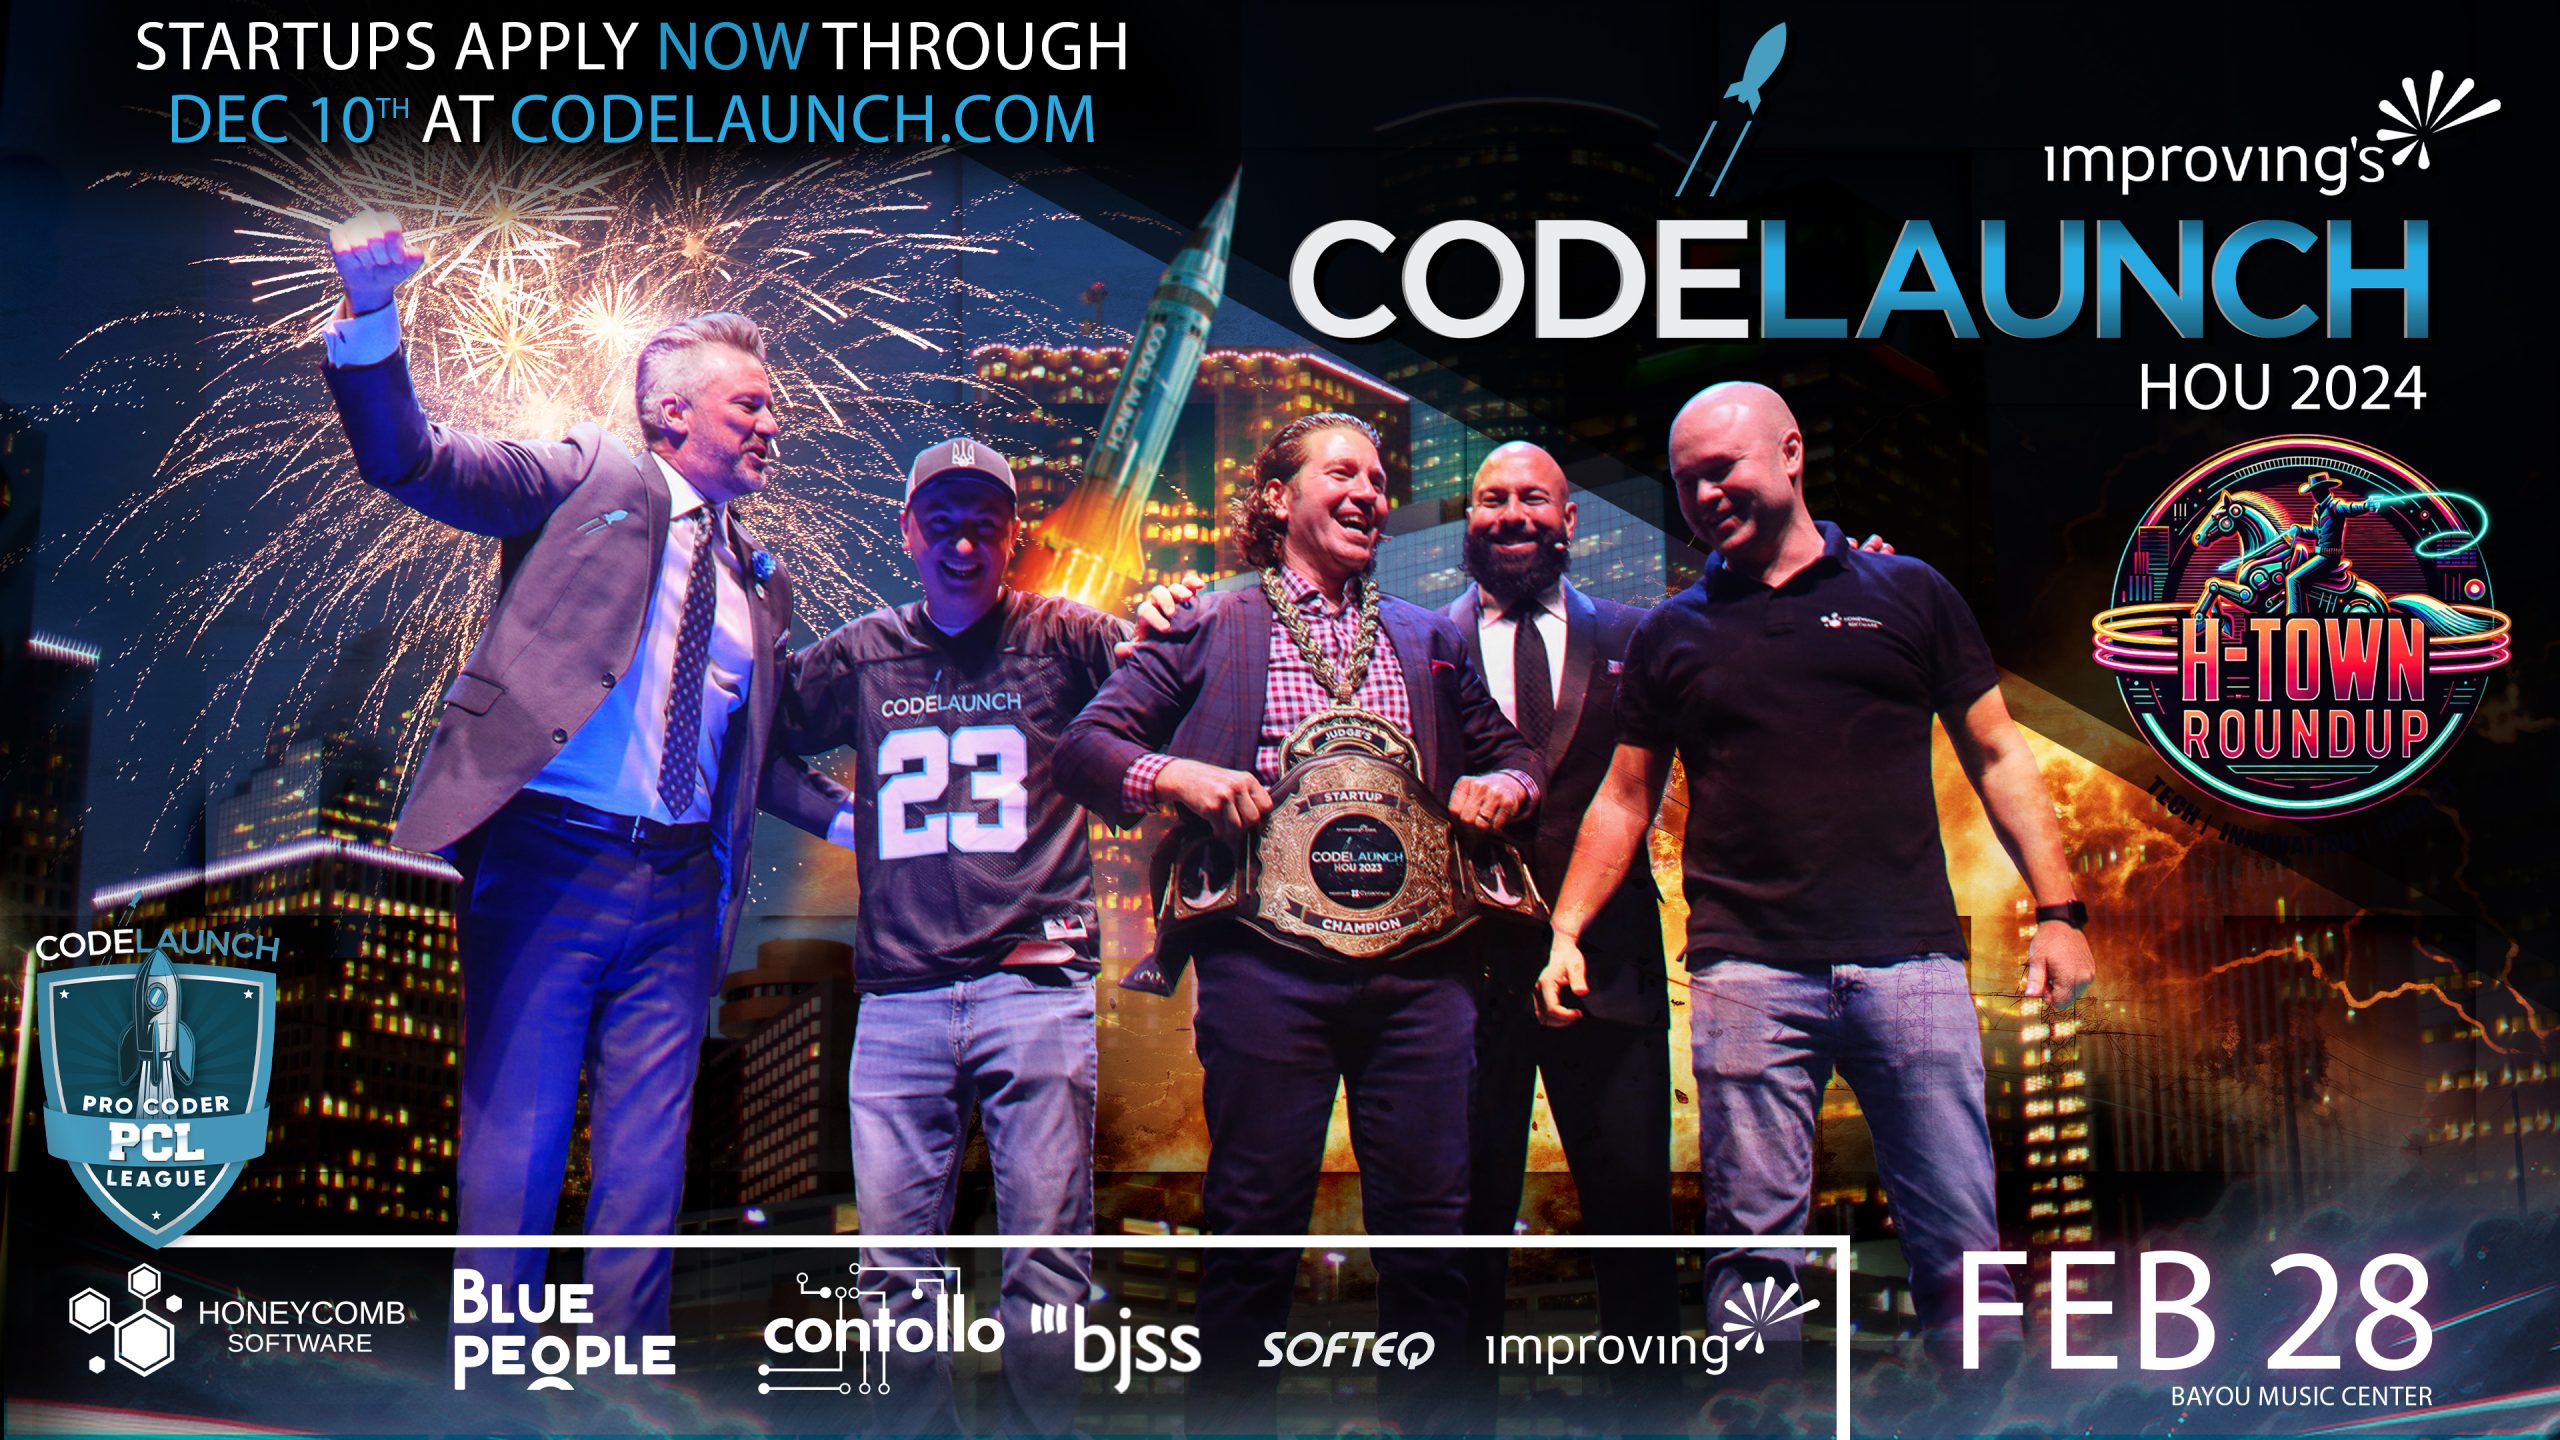 CodeLaunch, The Greatest Startup Show on Earth, is back in Houston on February 28th!